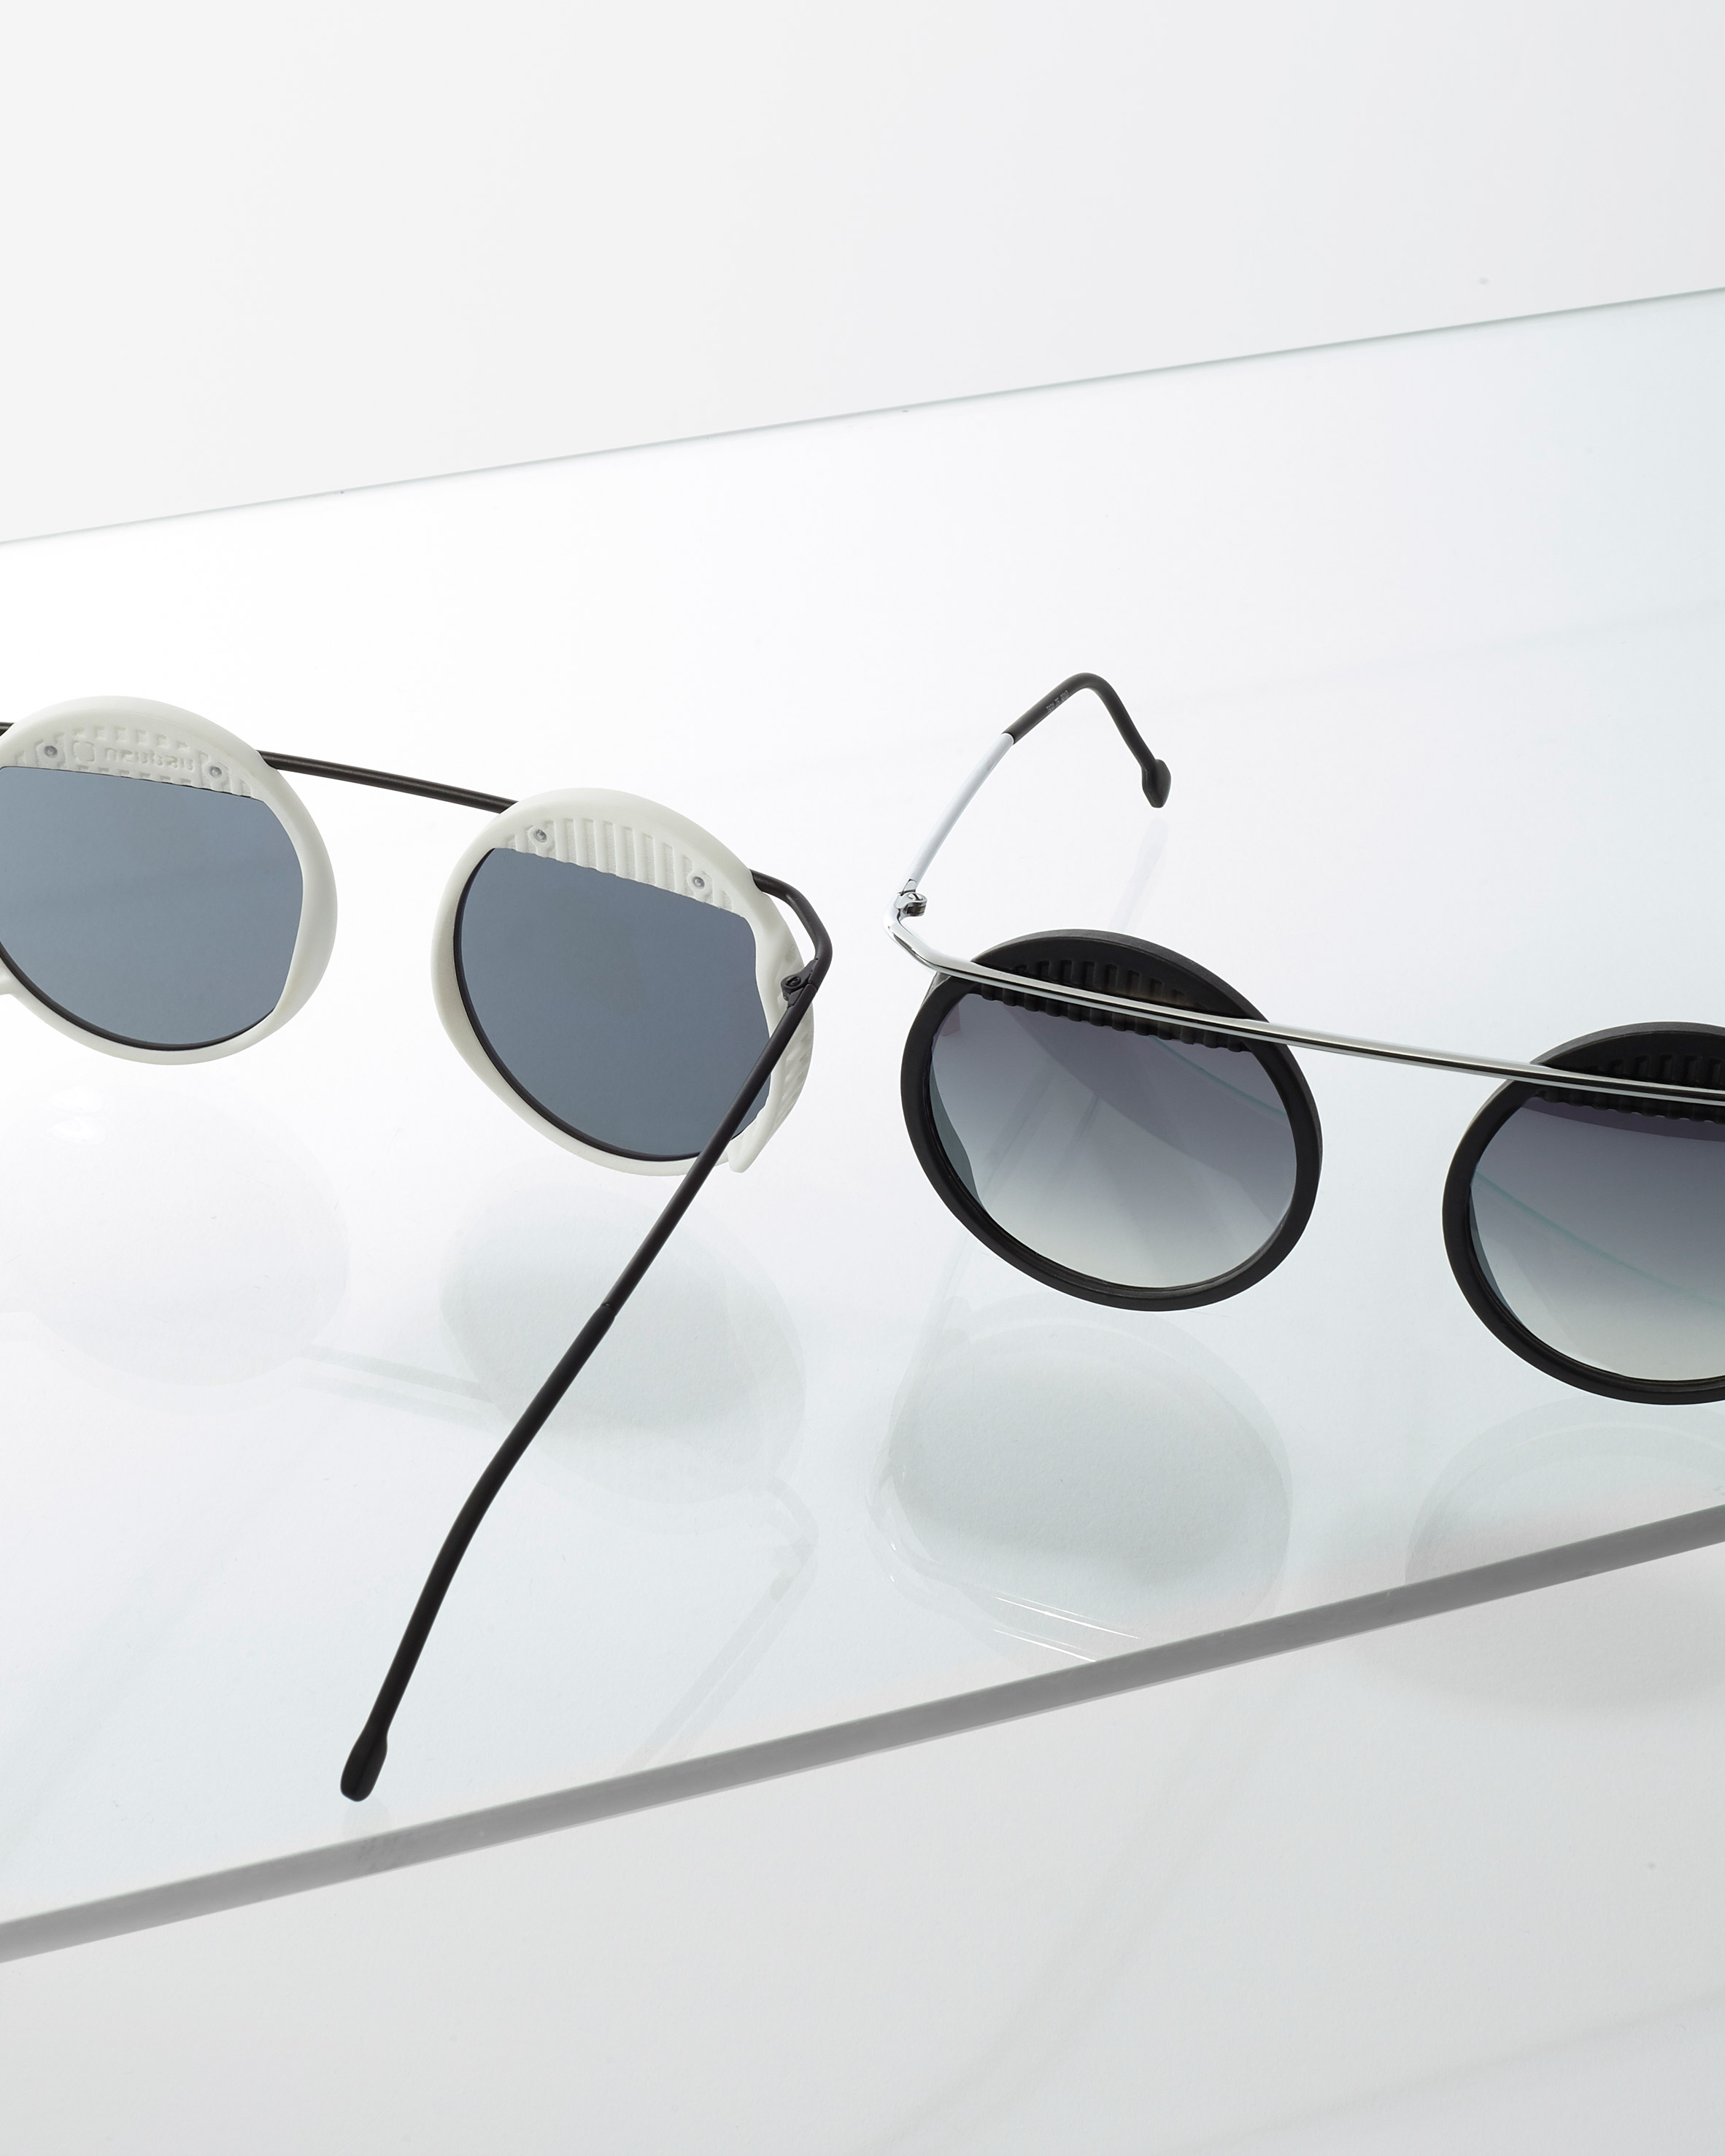 Walter & Wassily sunglasses collection by Neubau for Bauhaus 100 anniversary